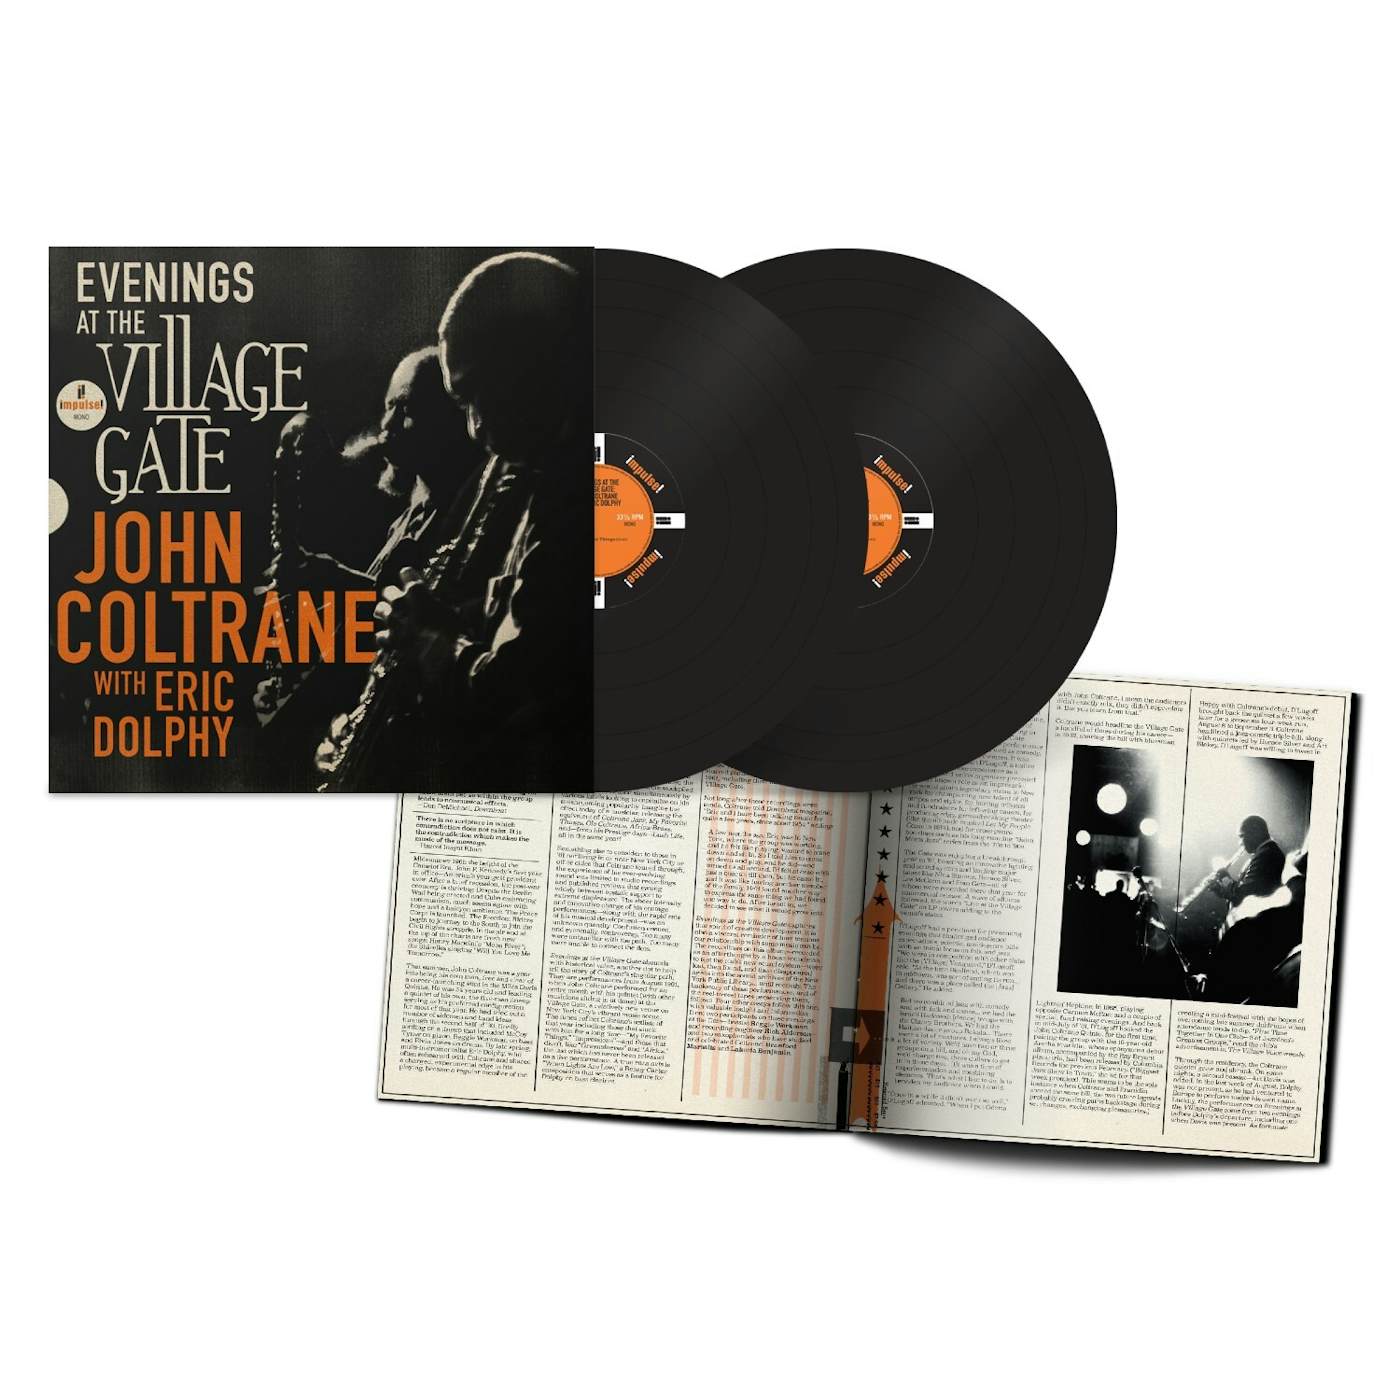 Evenings At The Village Gate: John Coltrane With Eric Dolphy 2 LP (Vinyl)